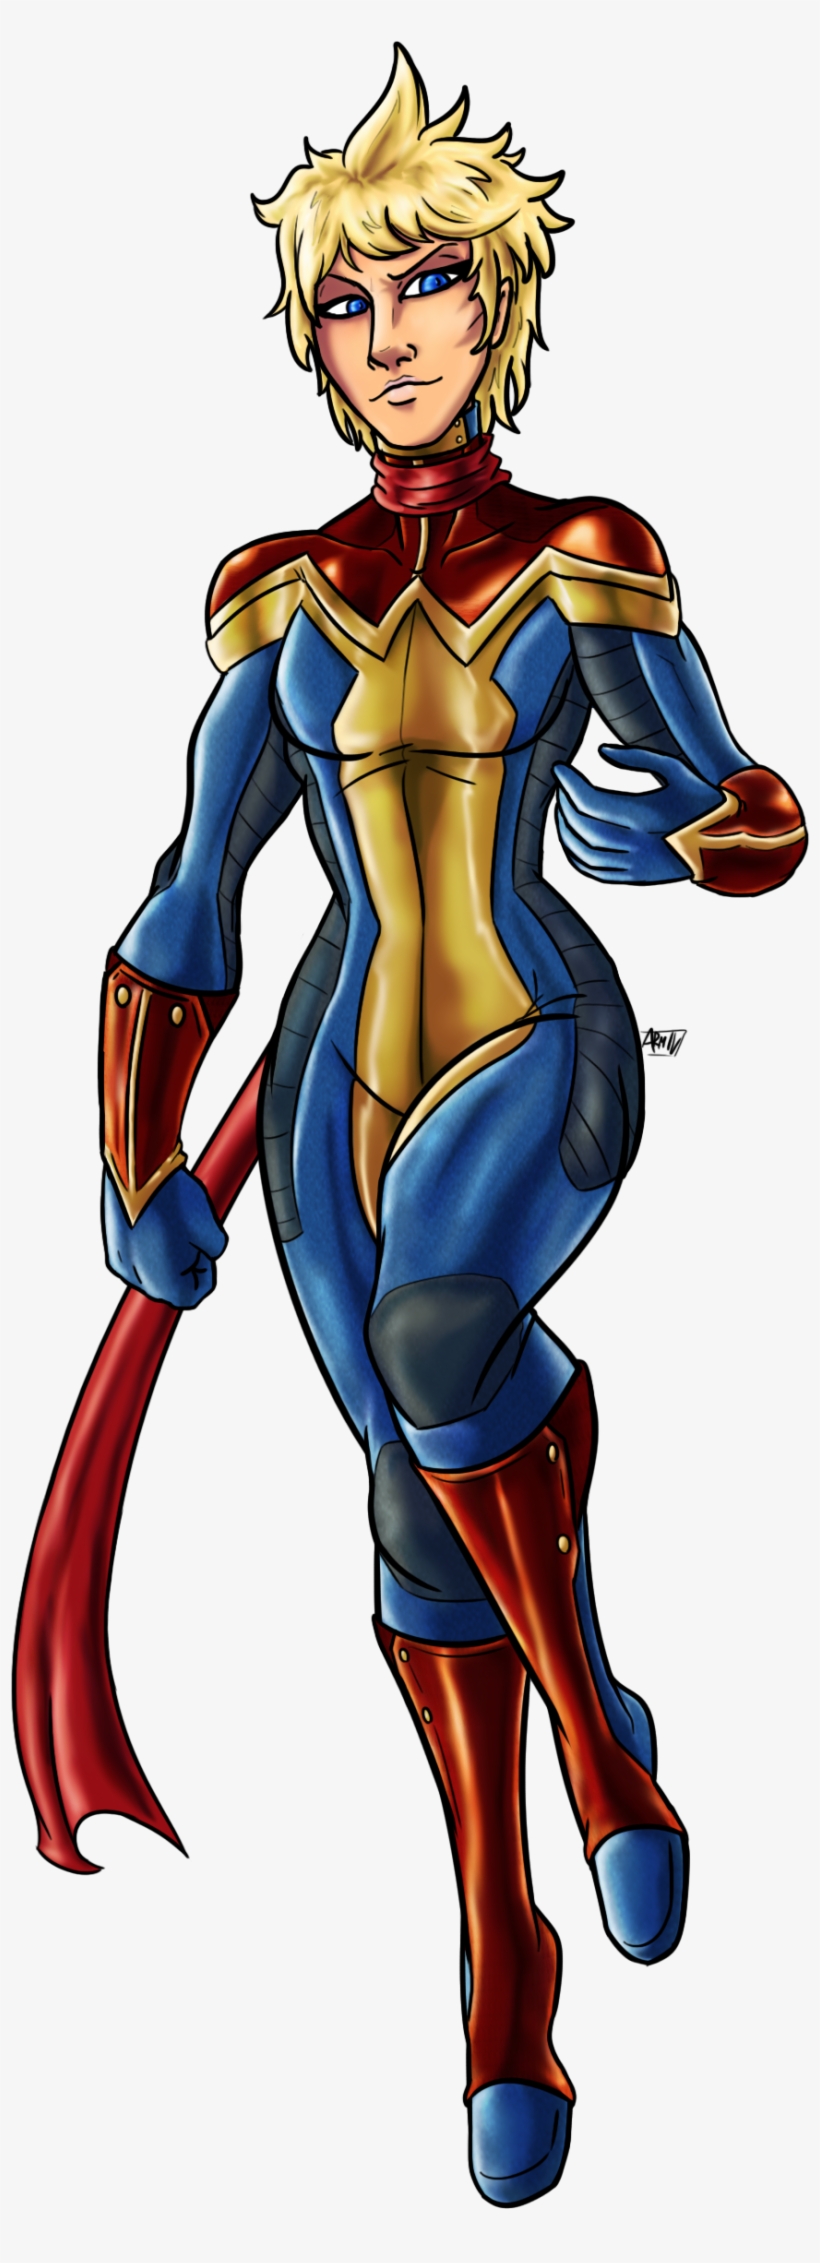 Super Last Minute, But All These Designs Are Awesome - Captain Marvel Redesign, transparent png #2178508